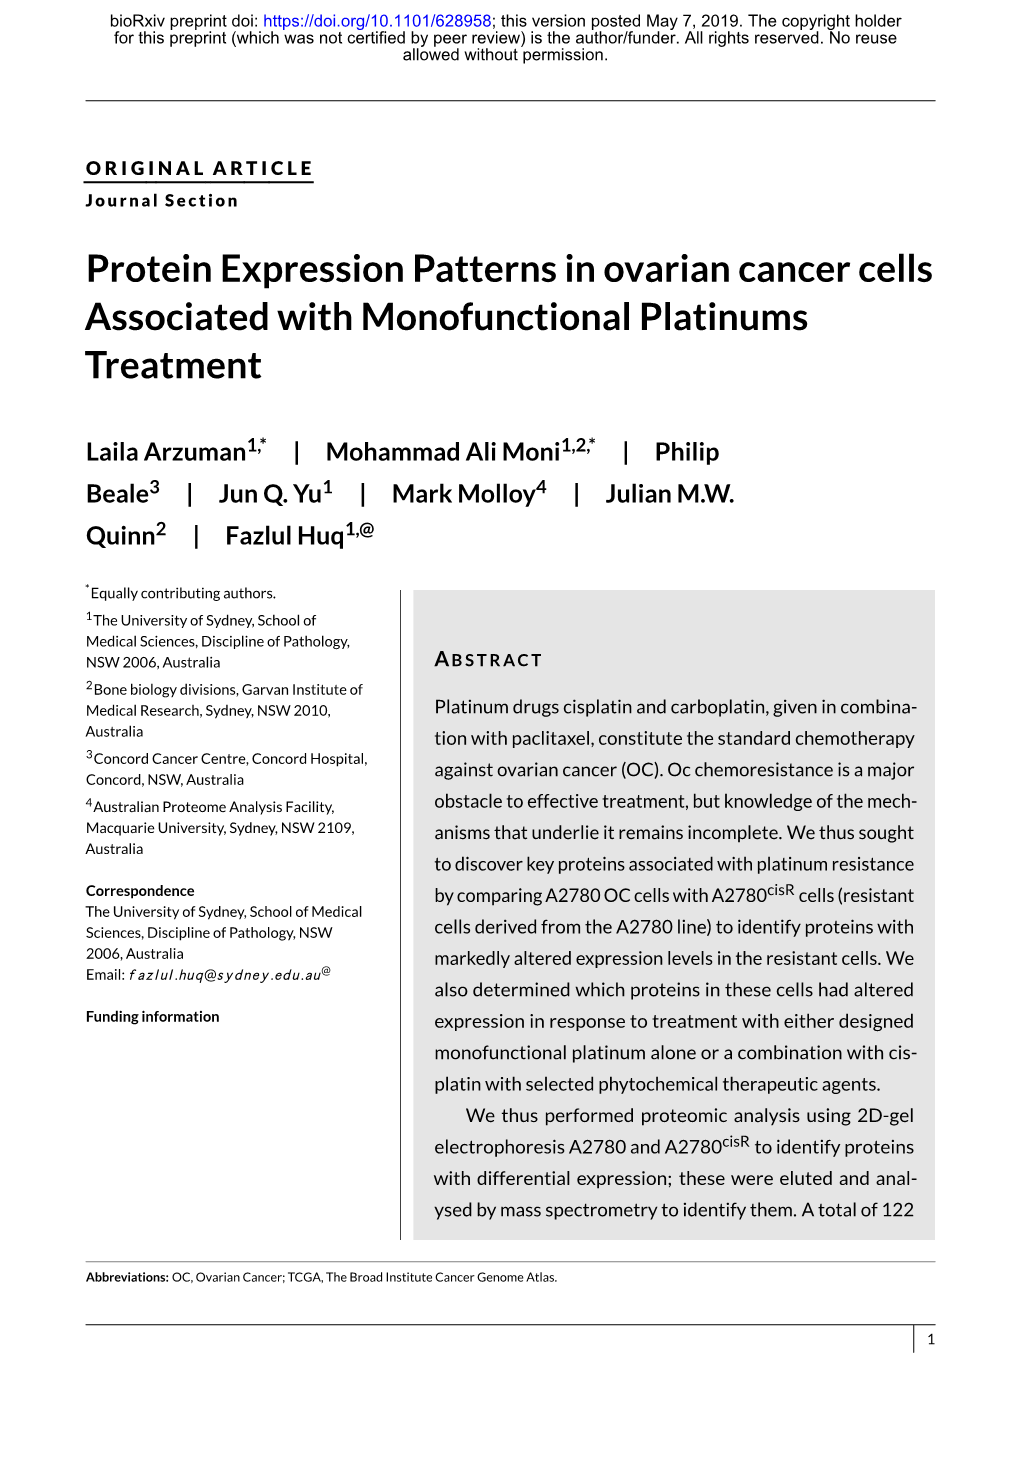 Protein Expression Patterns in Ovarian Cancer Cells Associated with Monofunctional Platinums Treatment